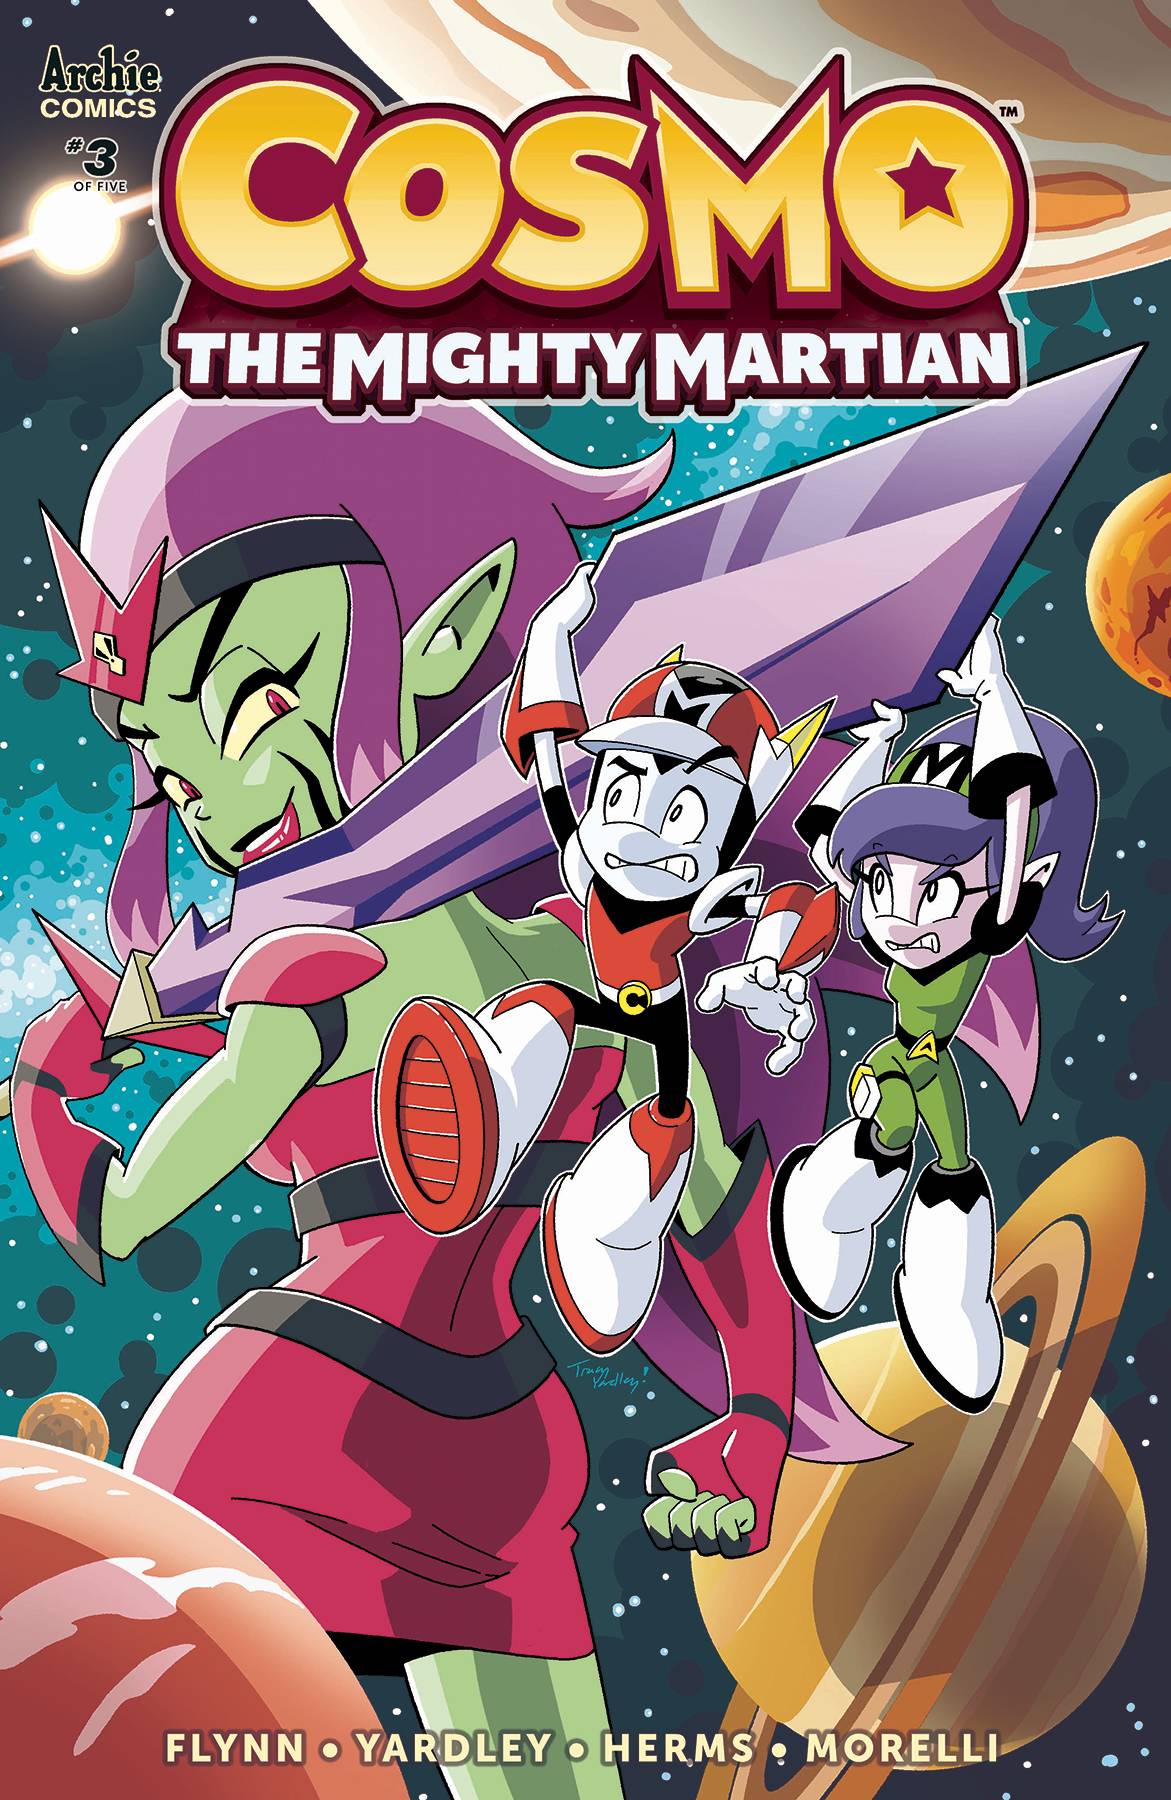 Cosmo: The Mighty Martian #3 (2020)